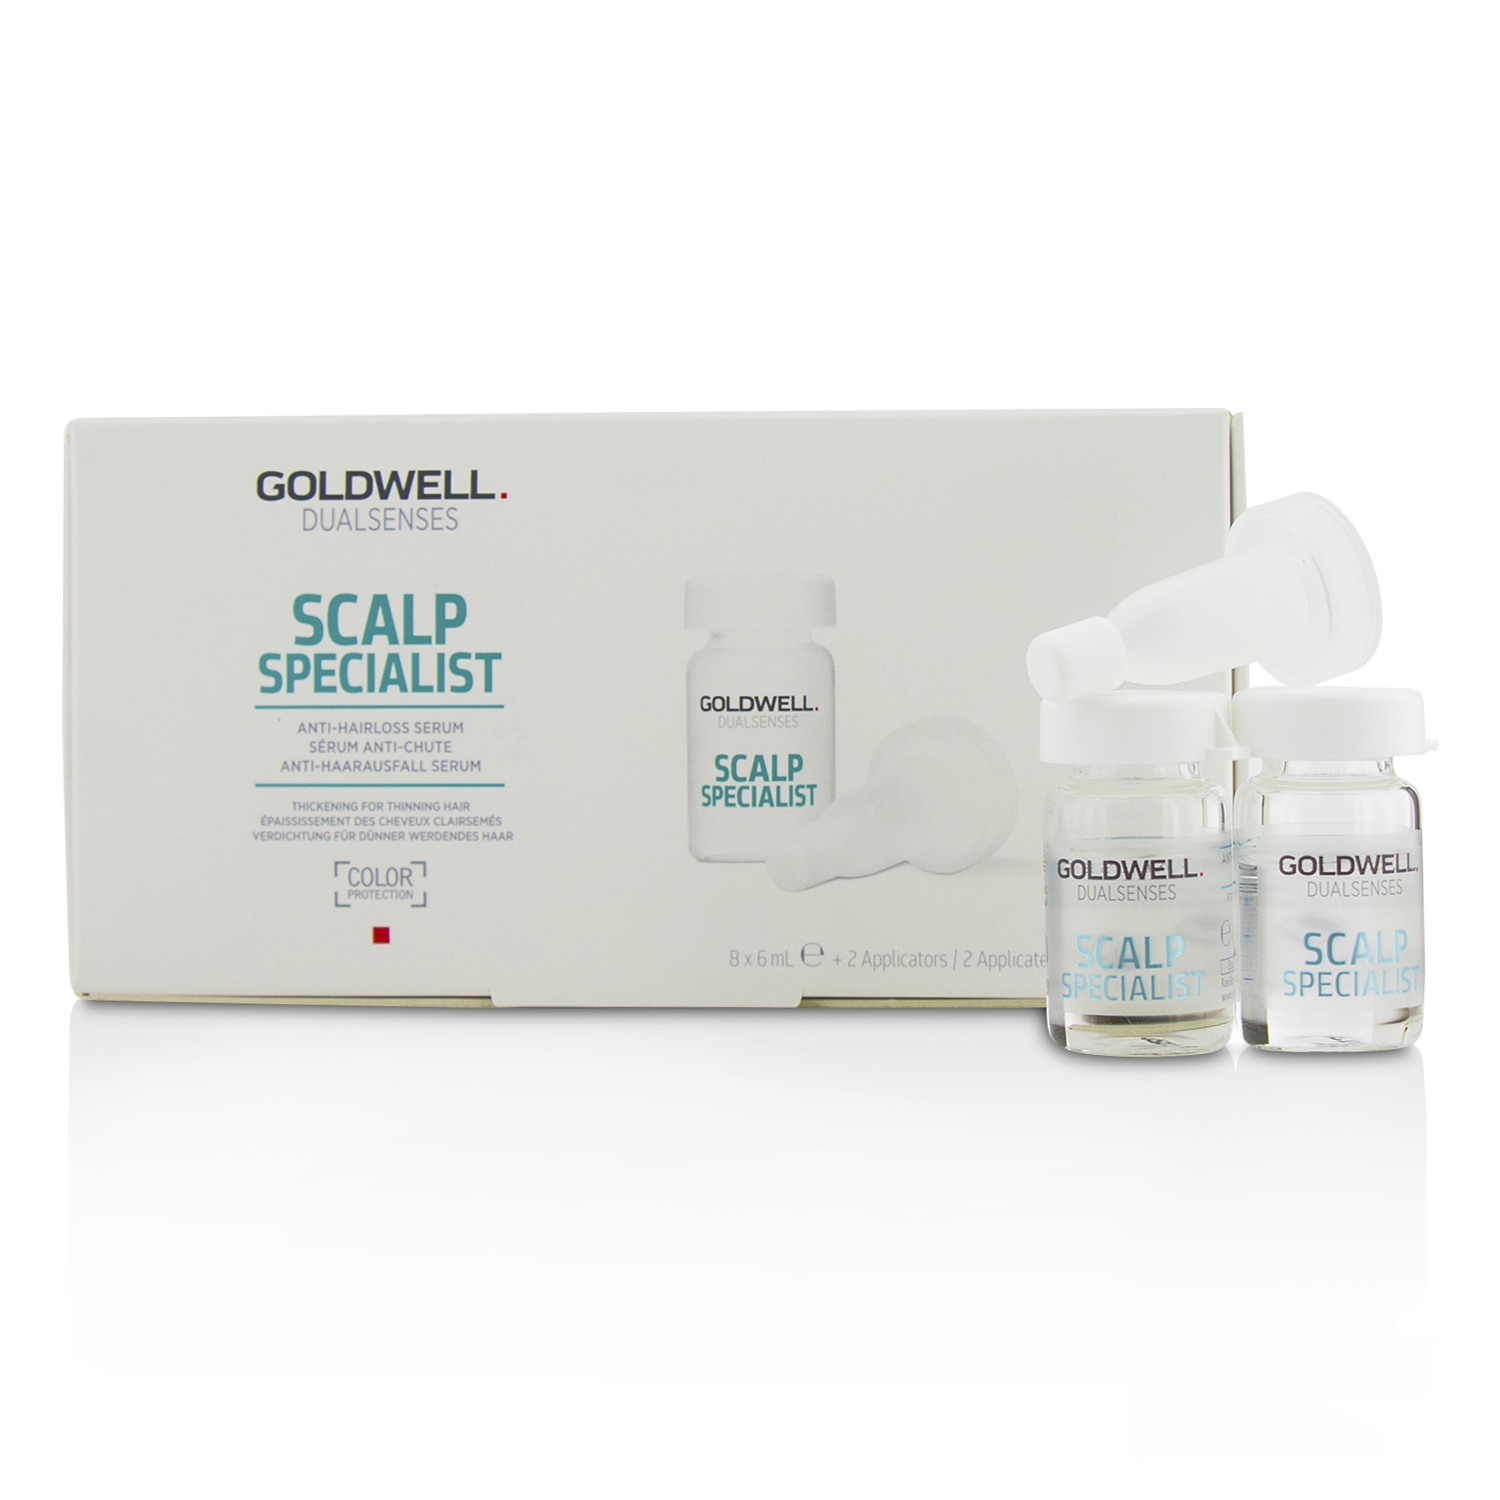 Dual Senses Scalp Specialist Anti-Hair Loss Serum (Thickening For Thinning Hair) Goldwell Image